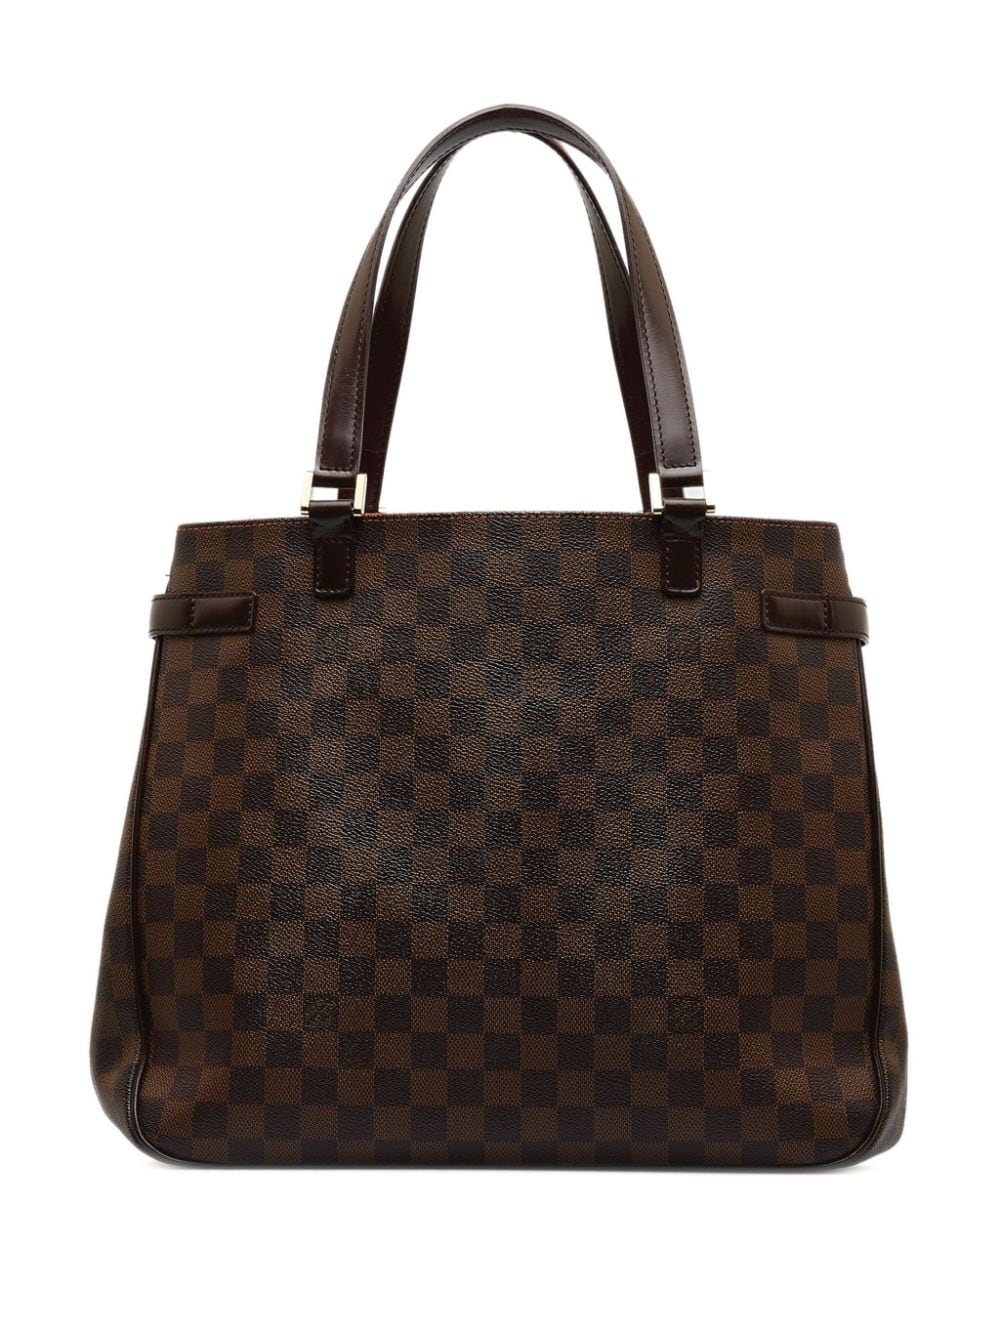 Louis Vuitton 2005 pre-owned Uzes tote bag - Bruin